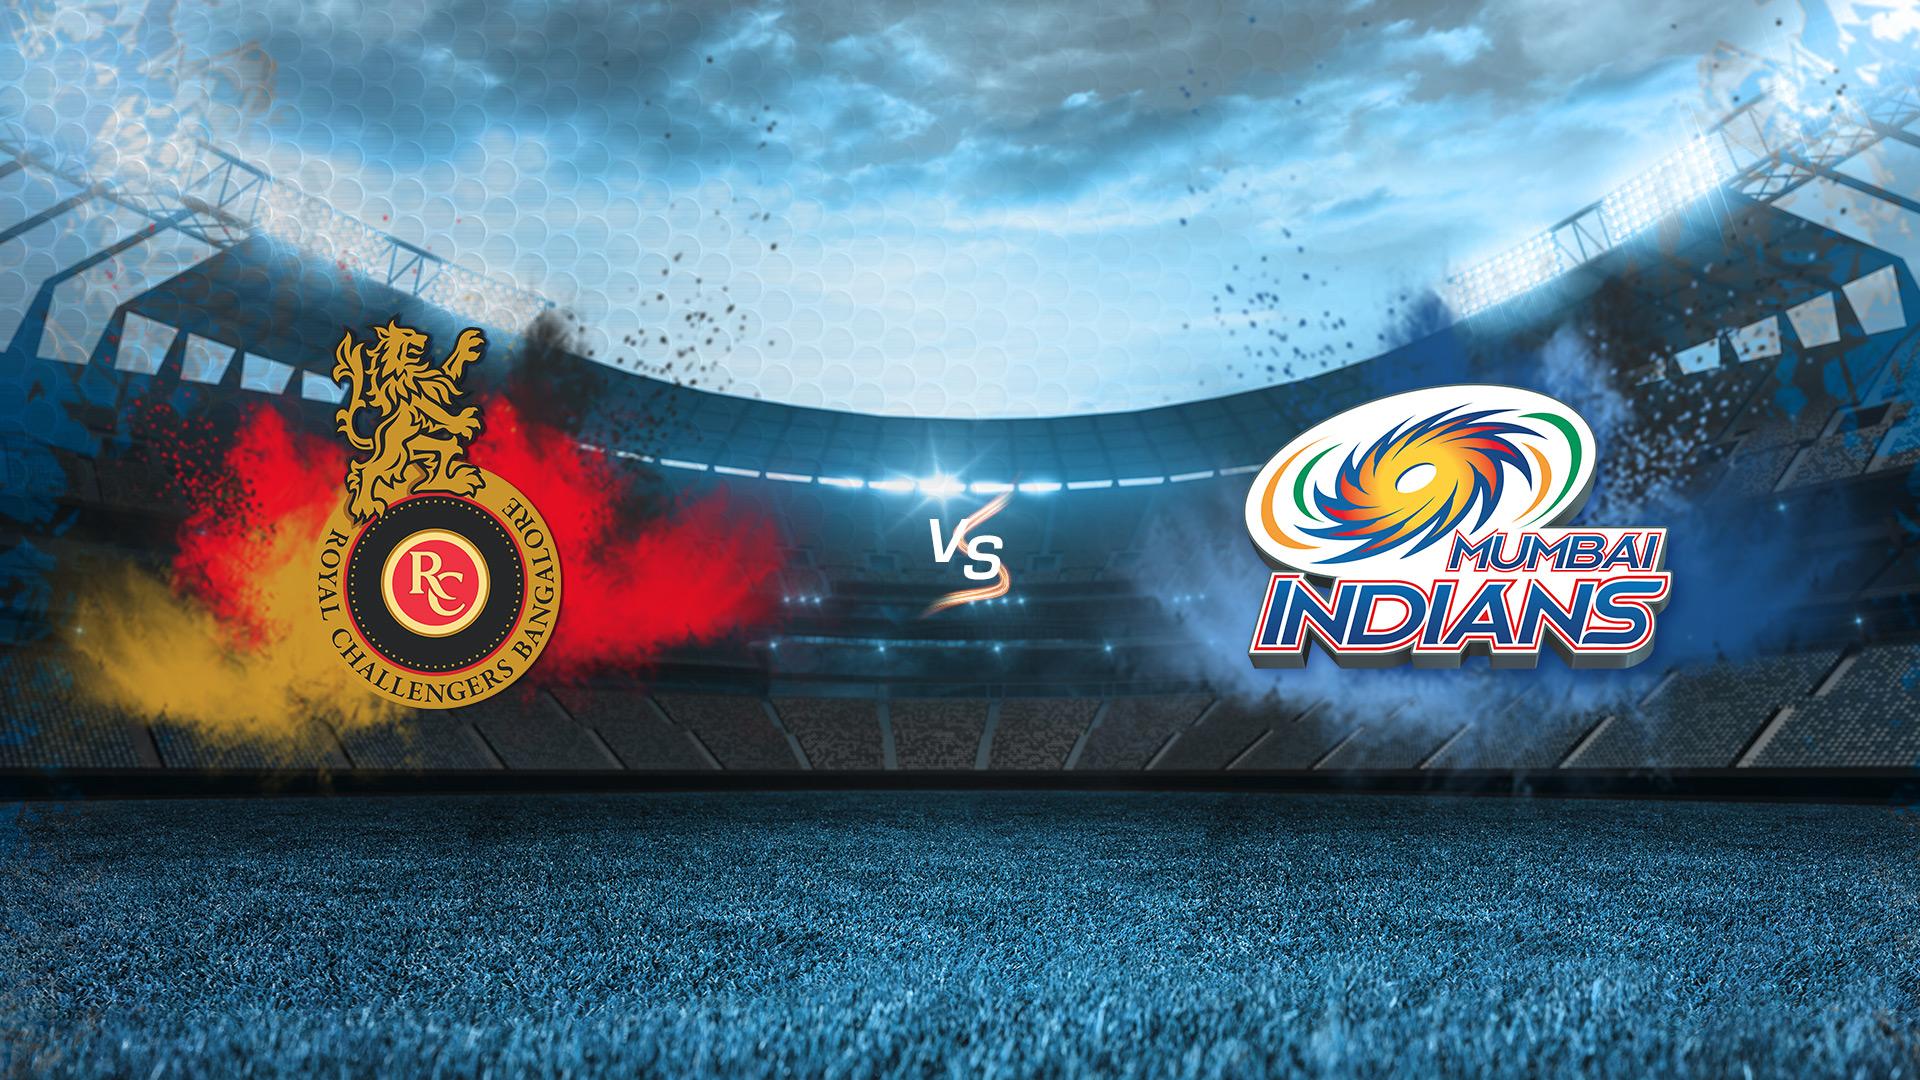 Royal Challengers Bangalore (RCB) will look to get back to winning